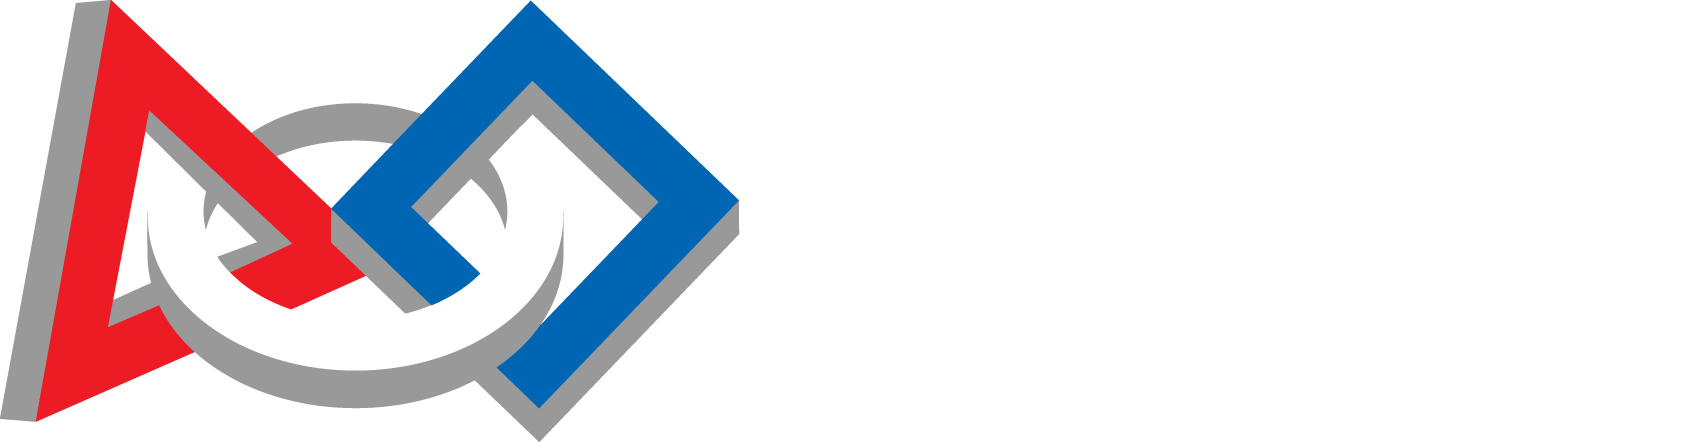 FIRST® logo and acronym